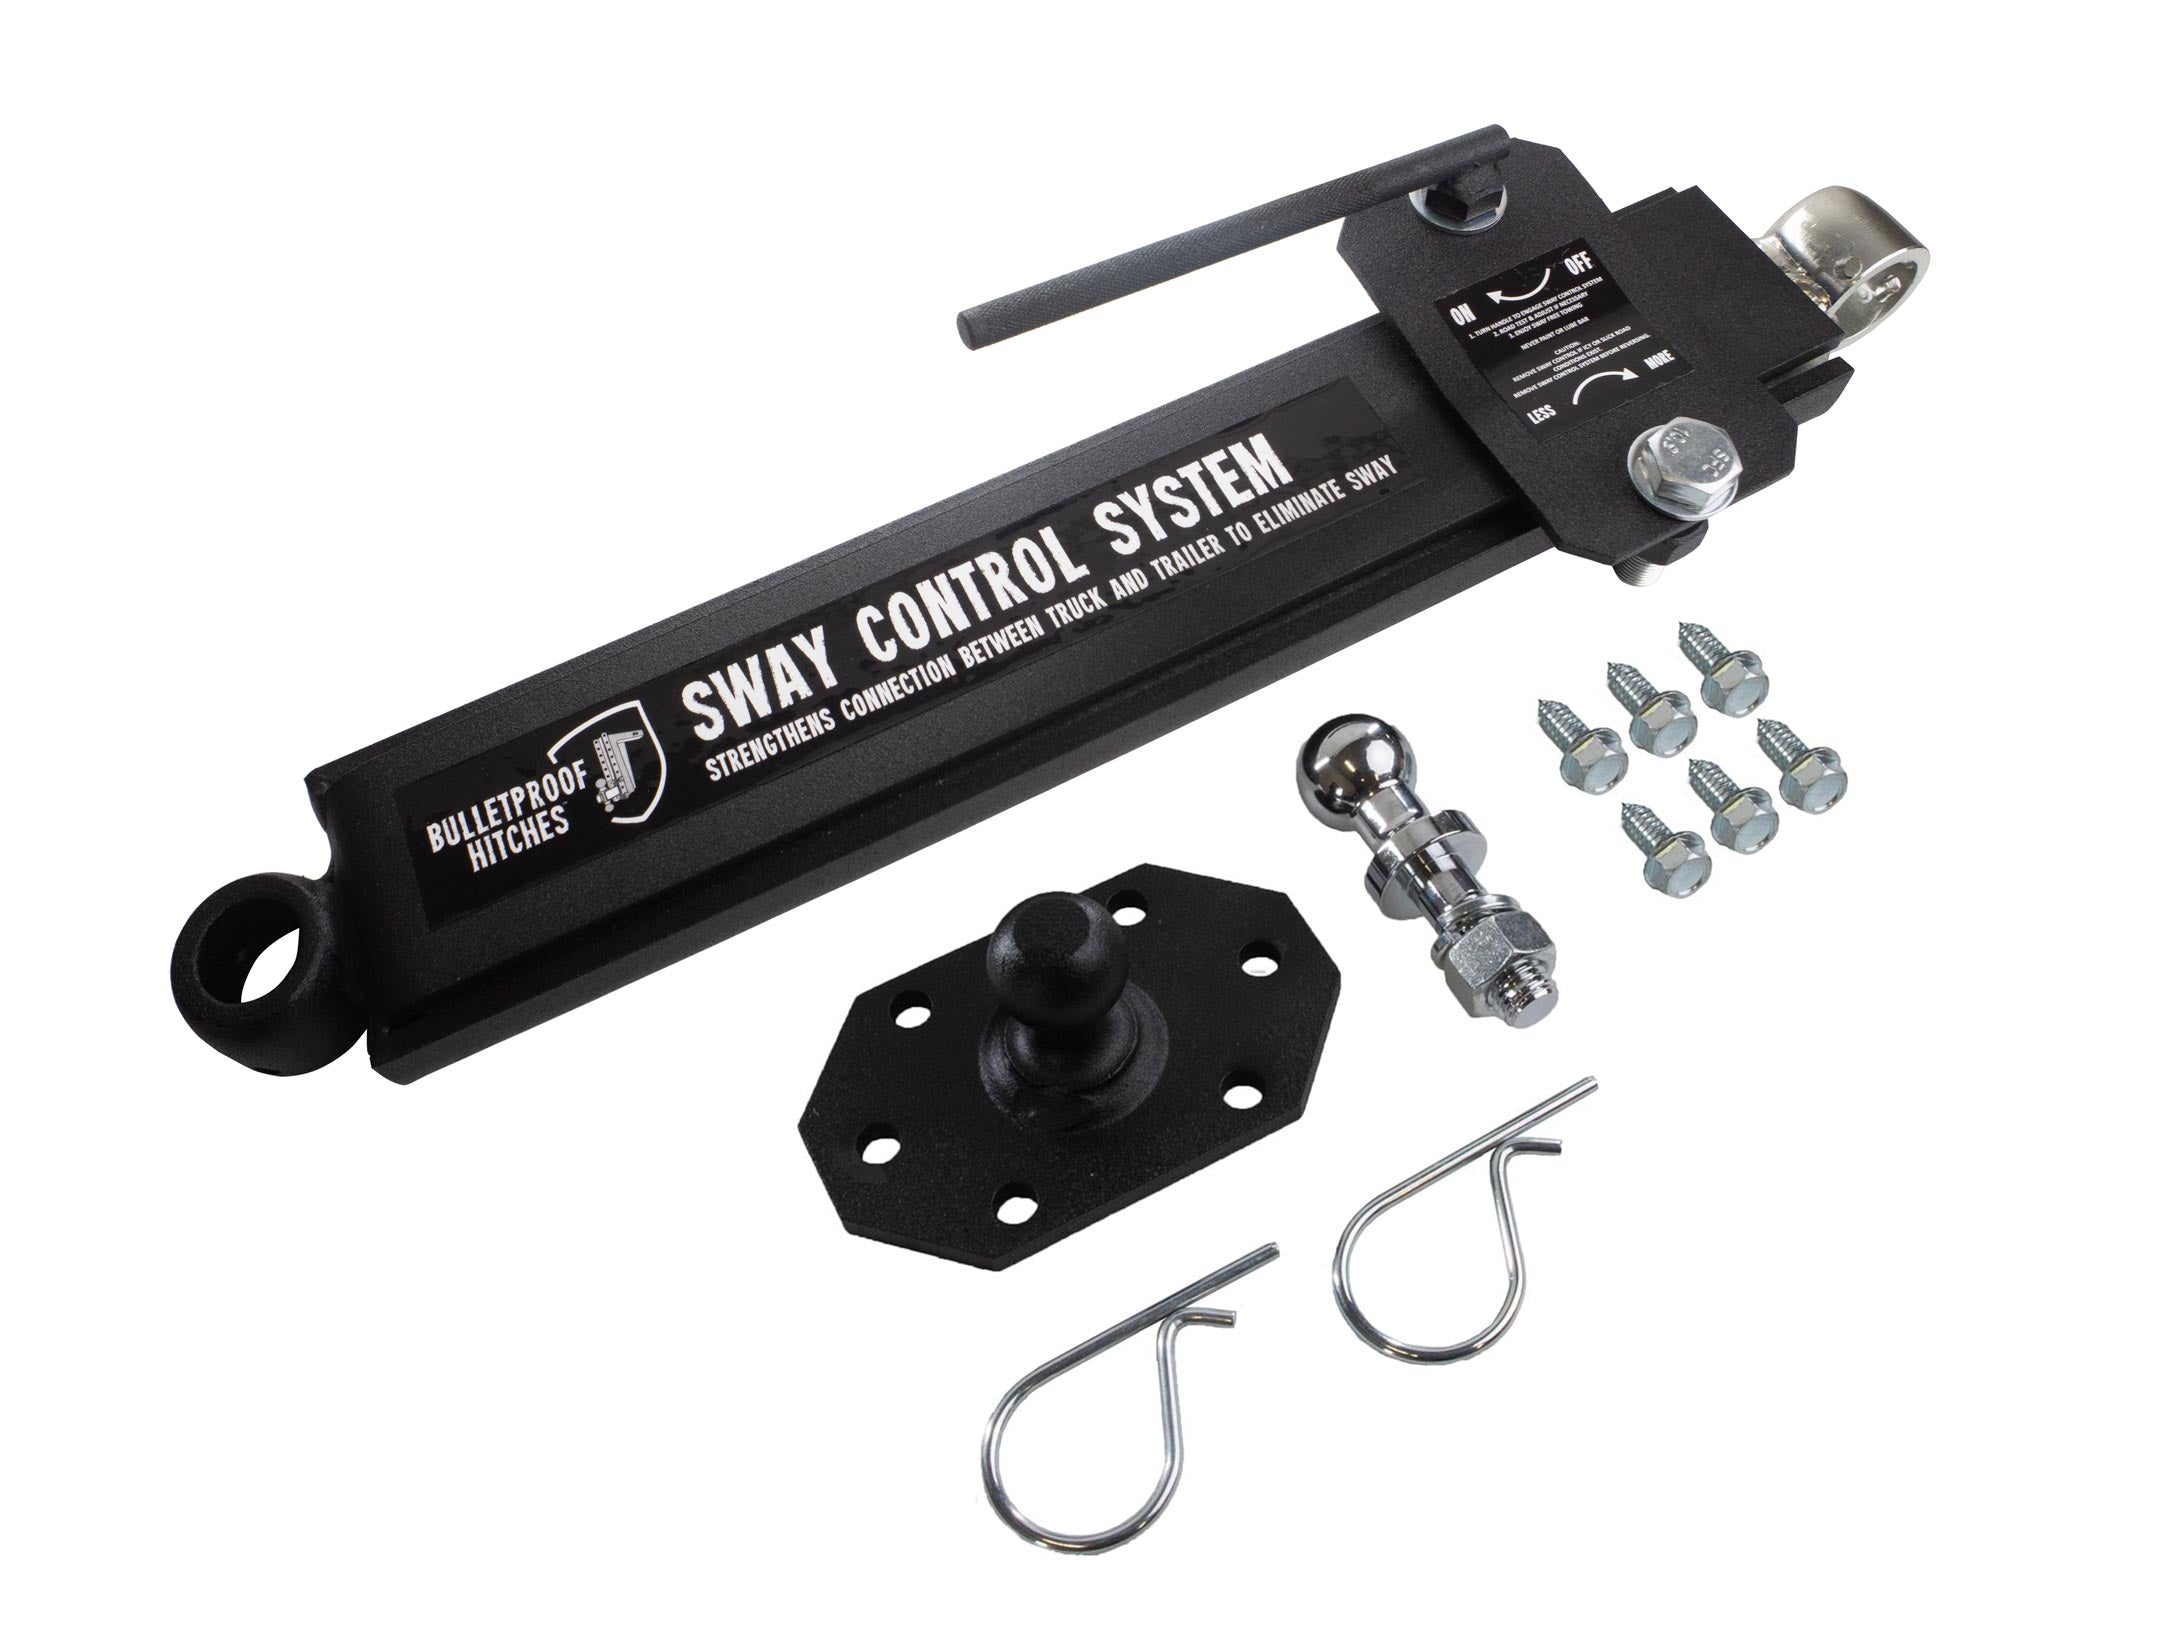 BulletProof Sway Control System Included Parts